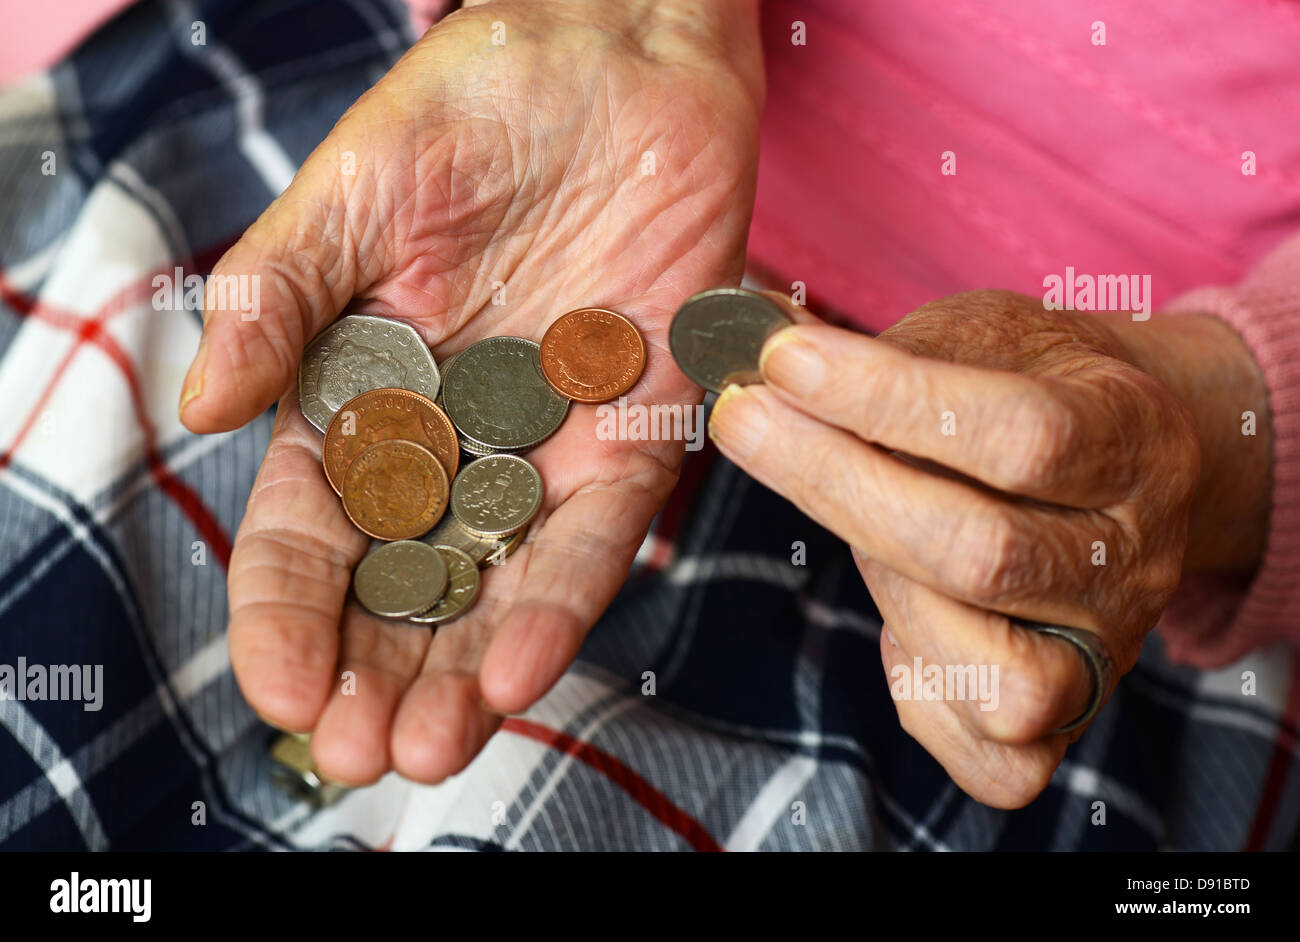 Money, coins in an elderly woman's hands, close up of cash in hands of older woman Stock Photo